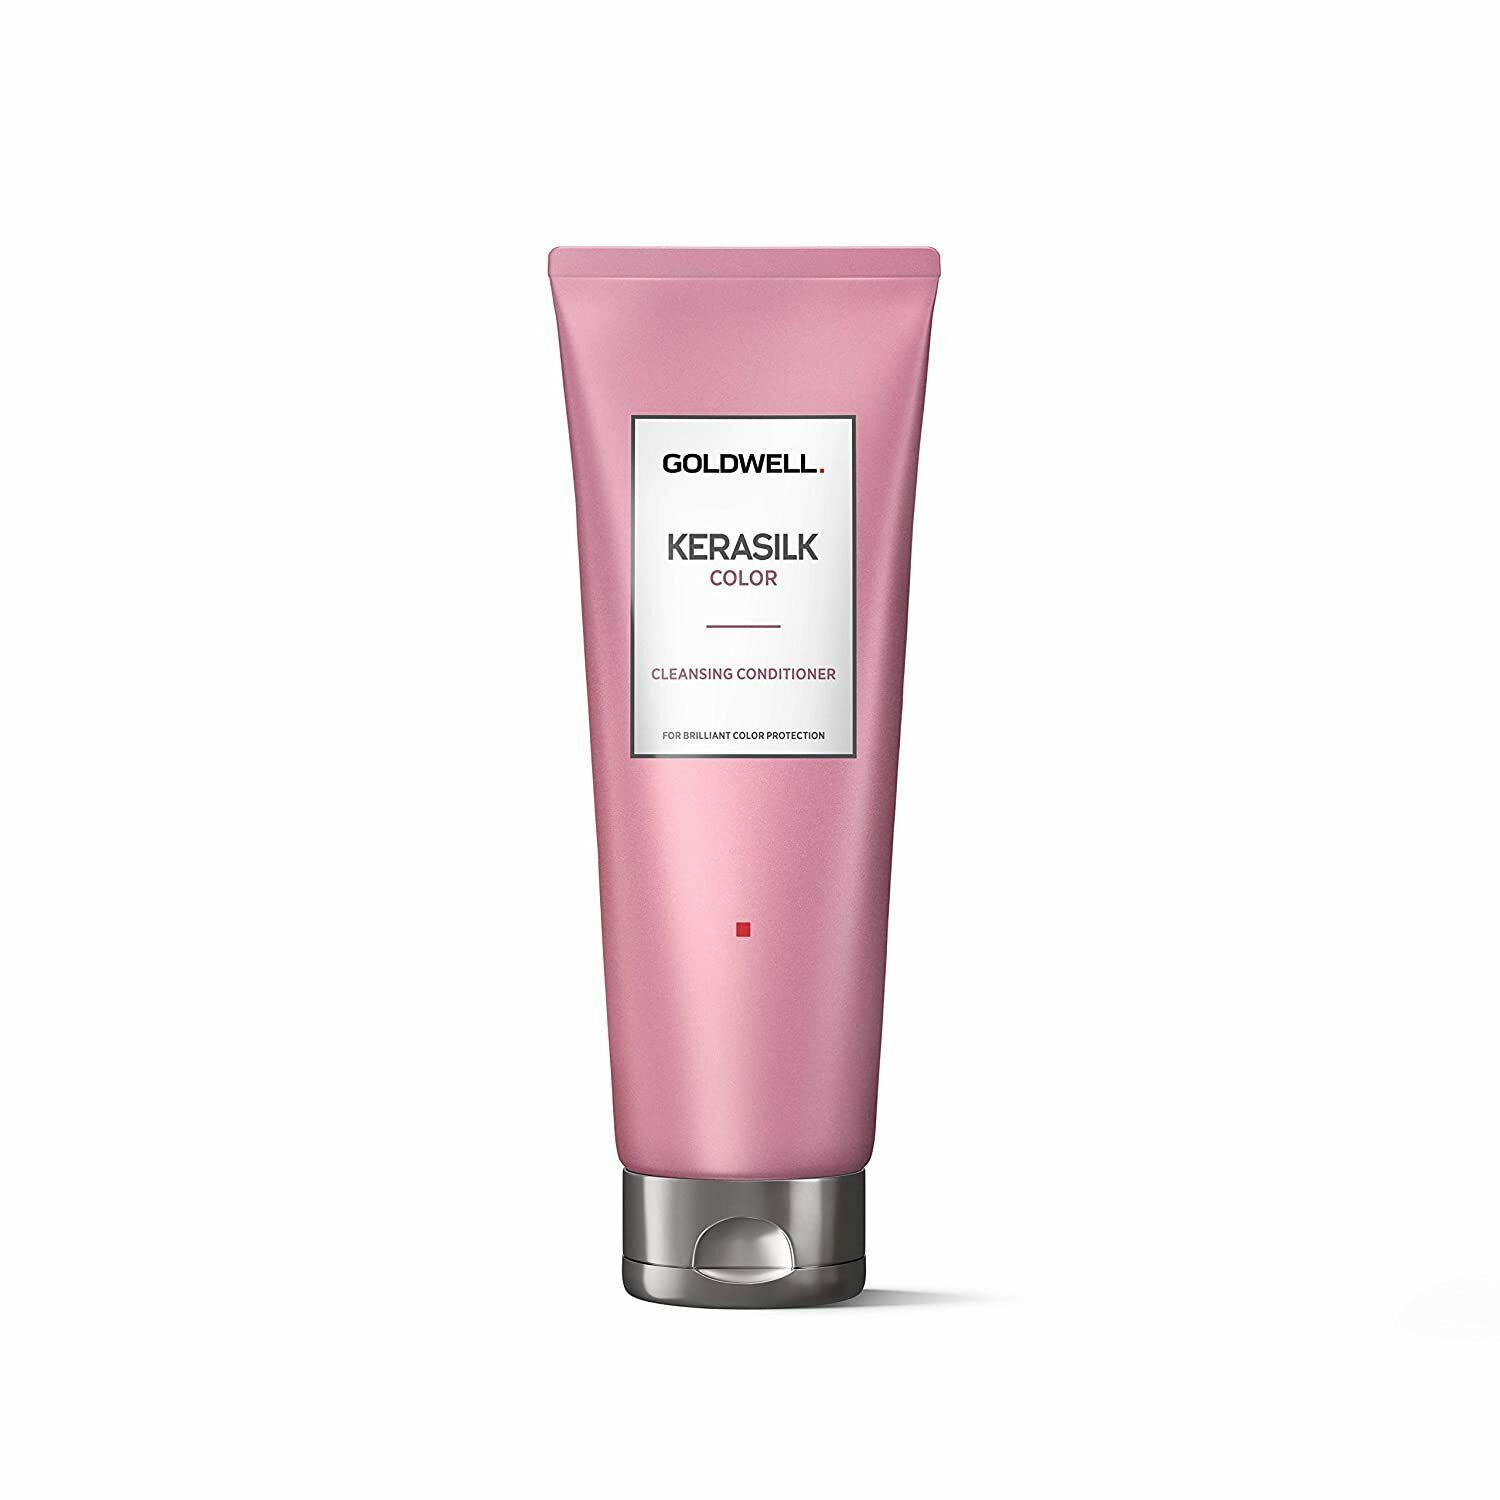 Goldwell Kerasilk Color Cleansing Conditioner 250ML - $31.99